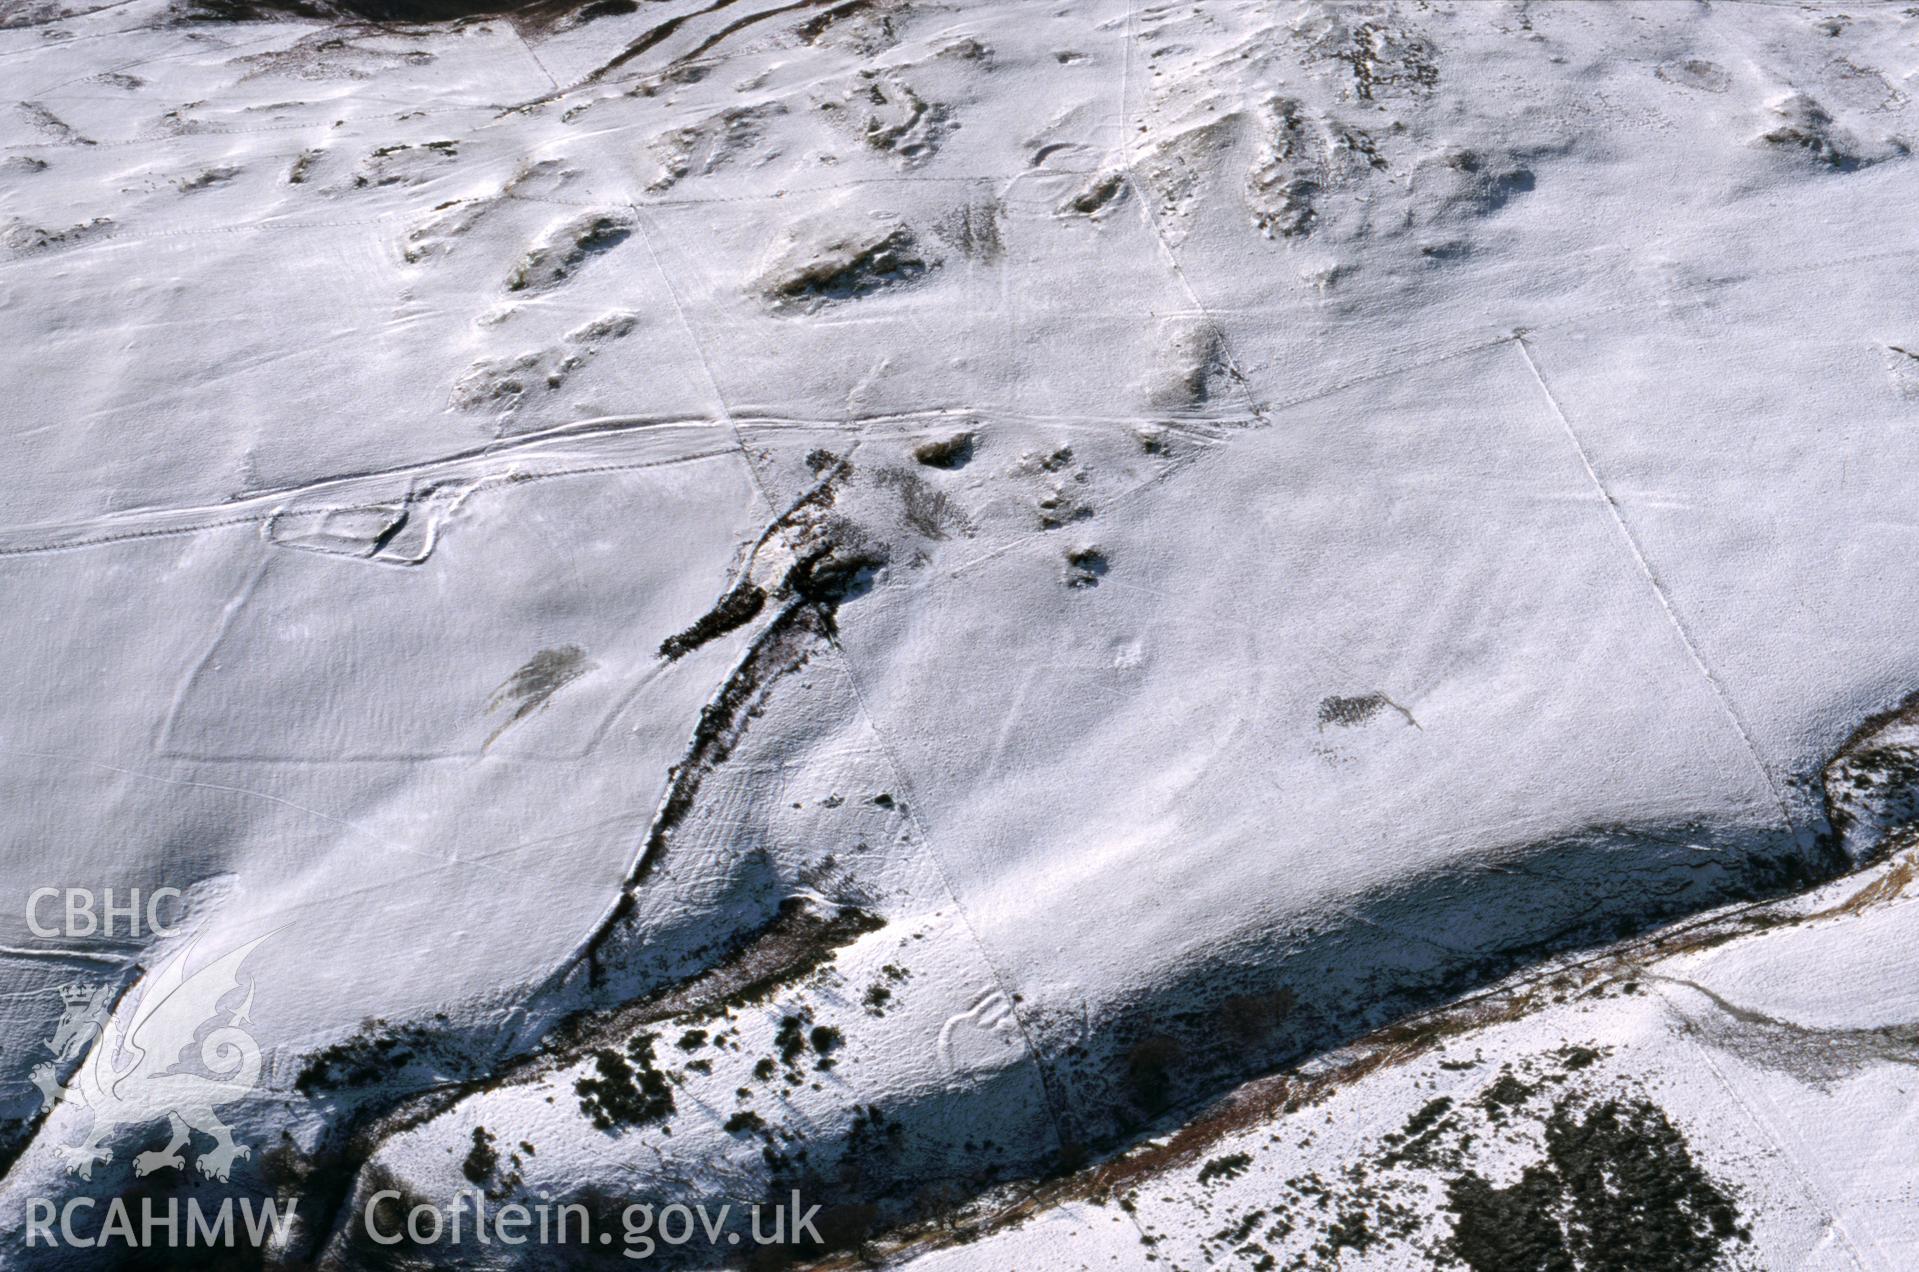 RCAHMW colour oblique aerial photograph of Cefn Golau & Cwm Sidwal, farmsteads and enclosures, under snow. Taken by Toby Driver on 31/01/2003